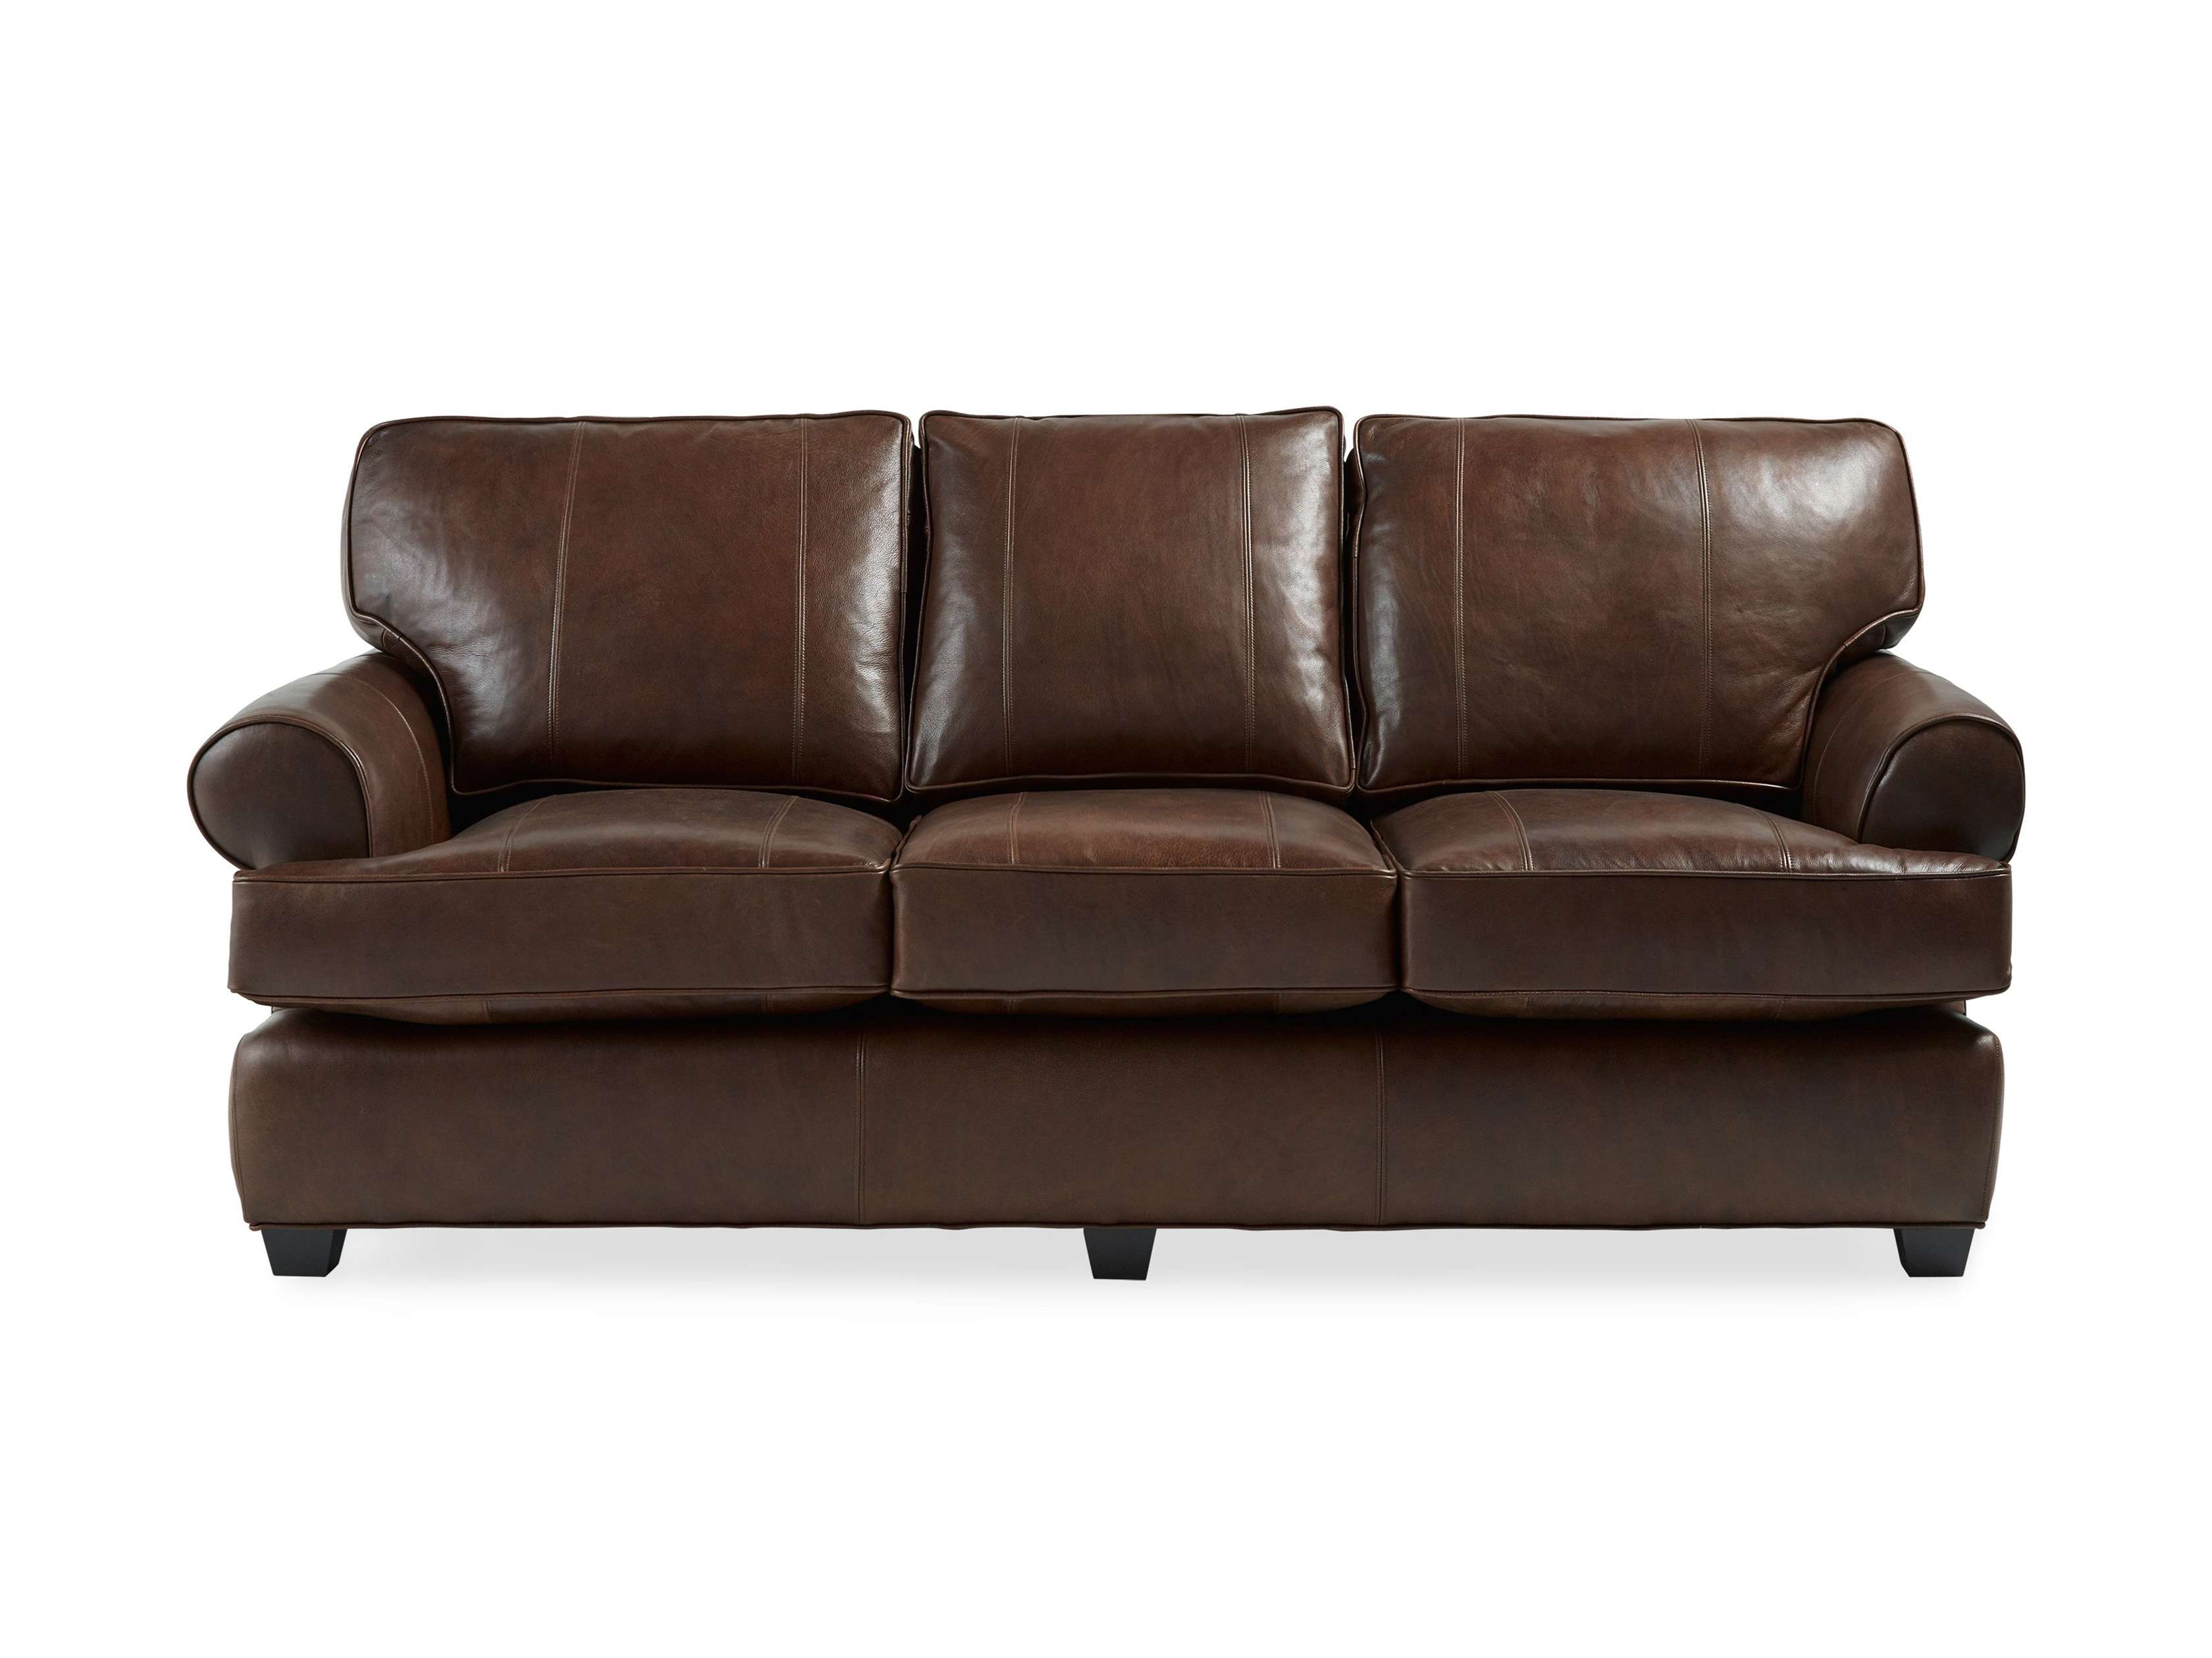 Hadley Leather Sofa Arhaus, Leather Sofa Bed Couch